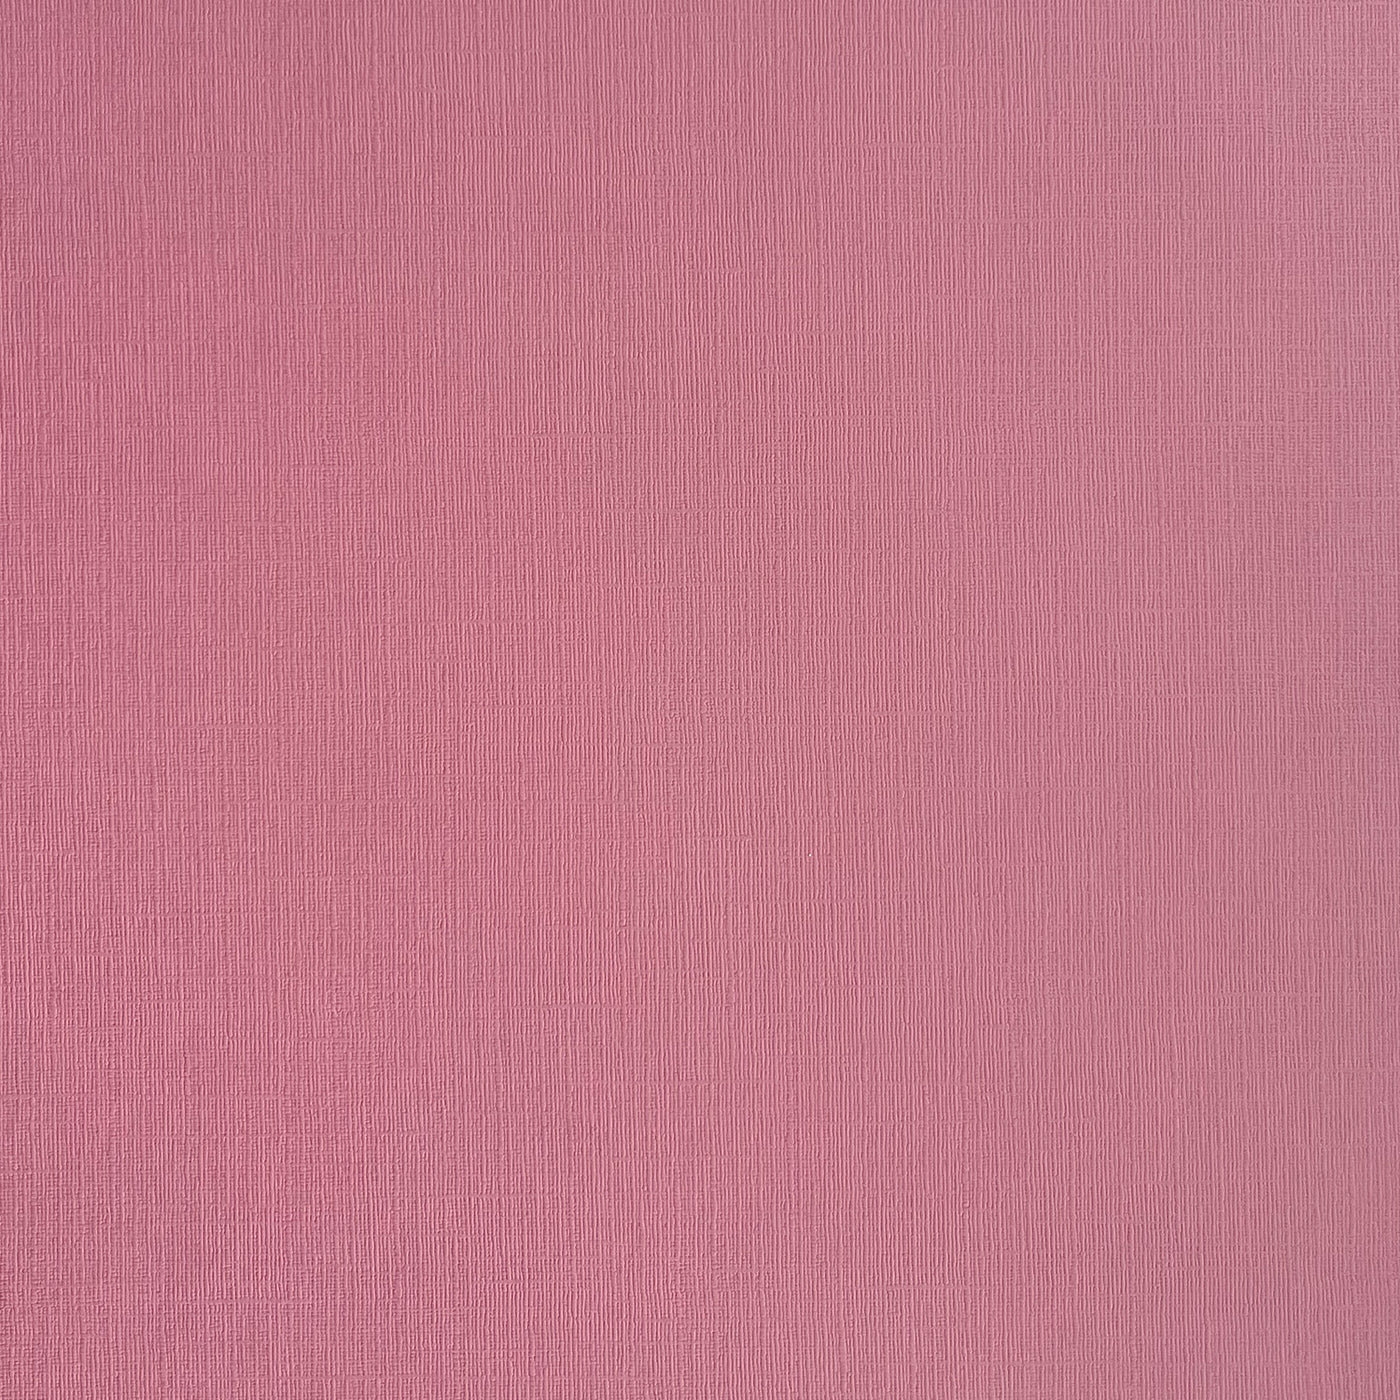 Coral Rose - Textured 12x12 Cardstock - Bright pink canvas scrapbook paper